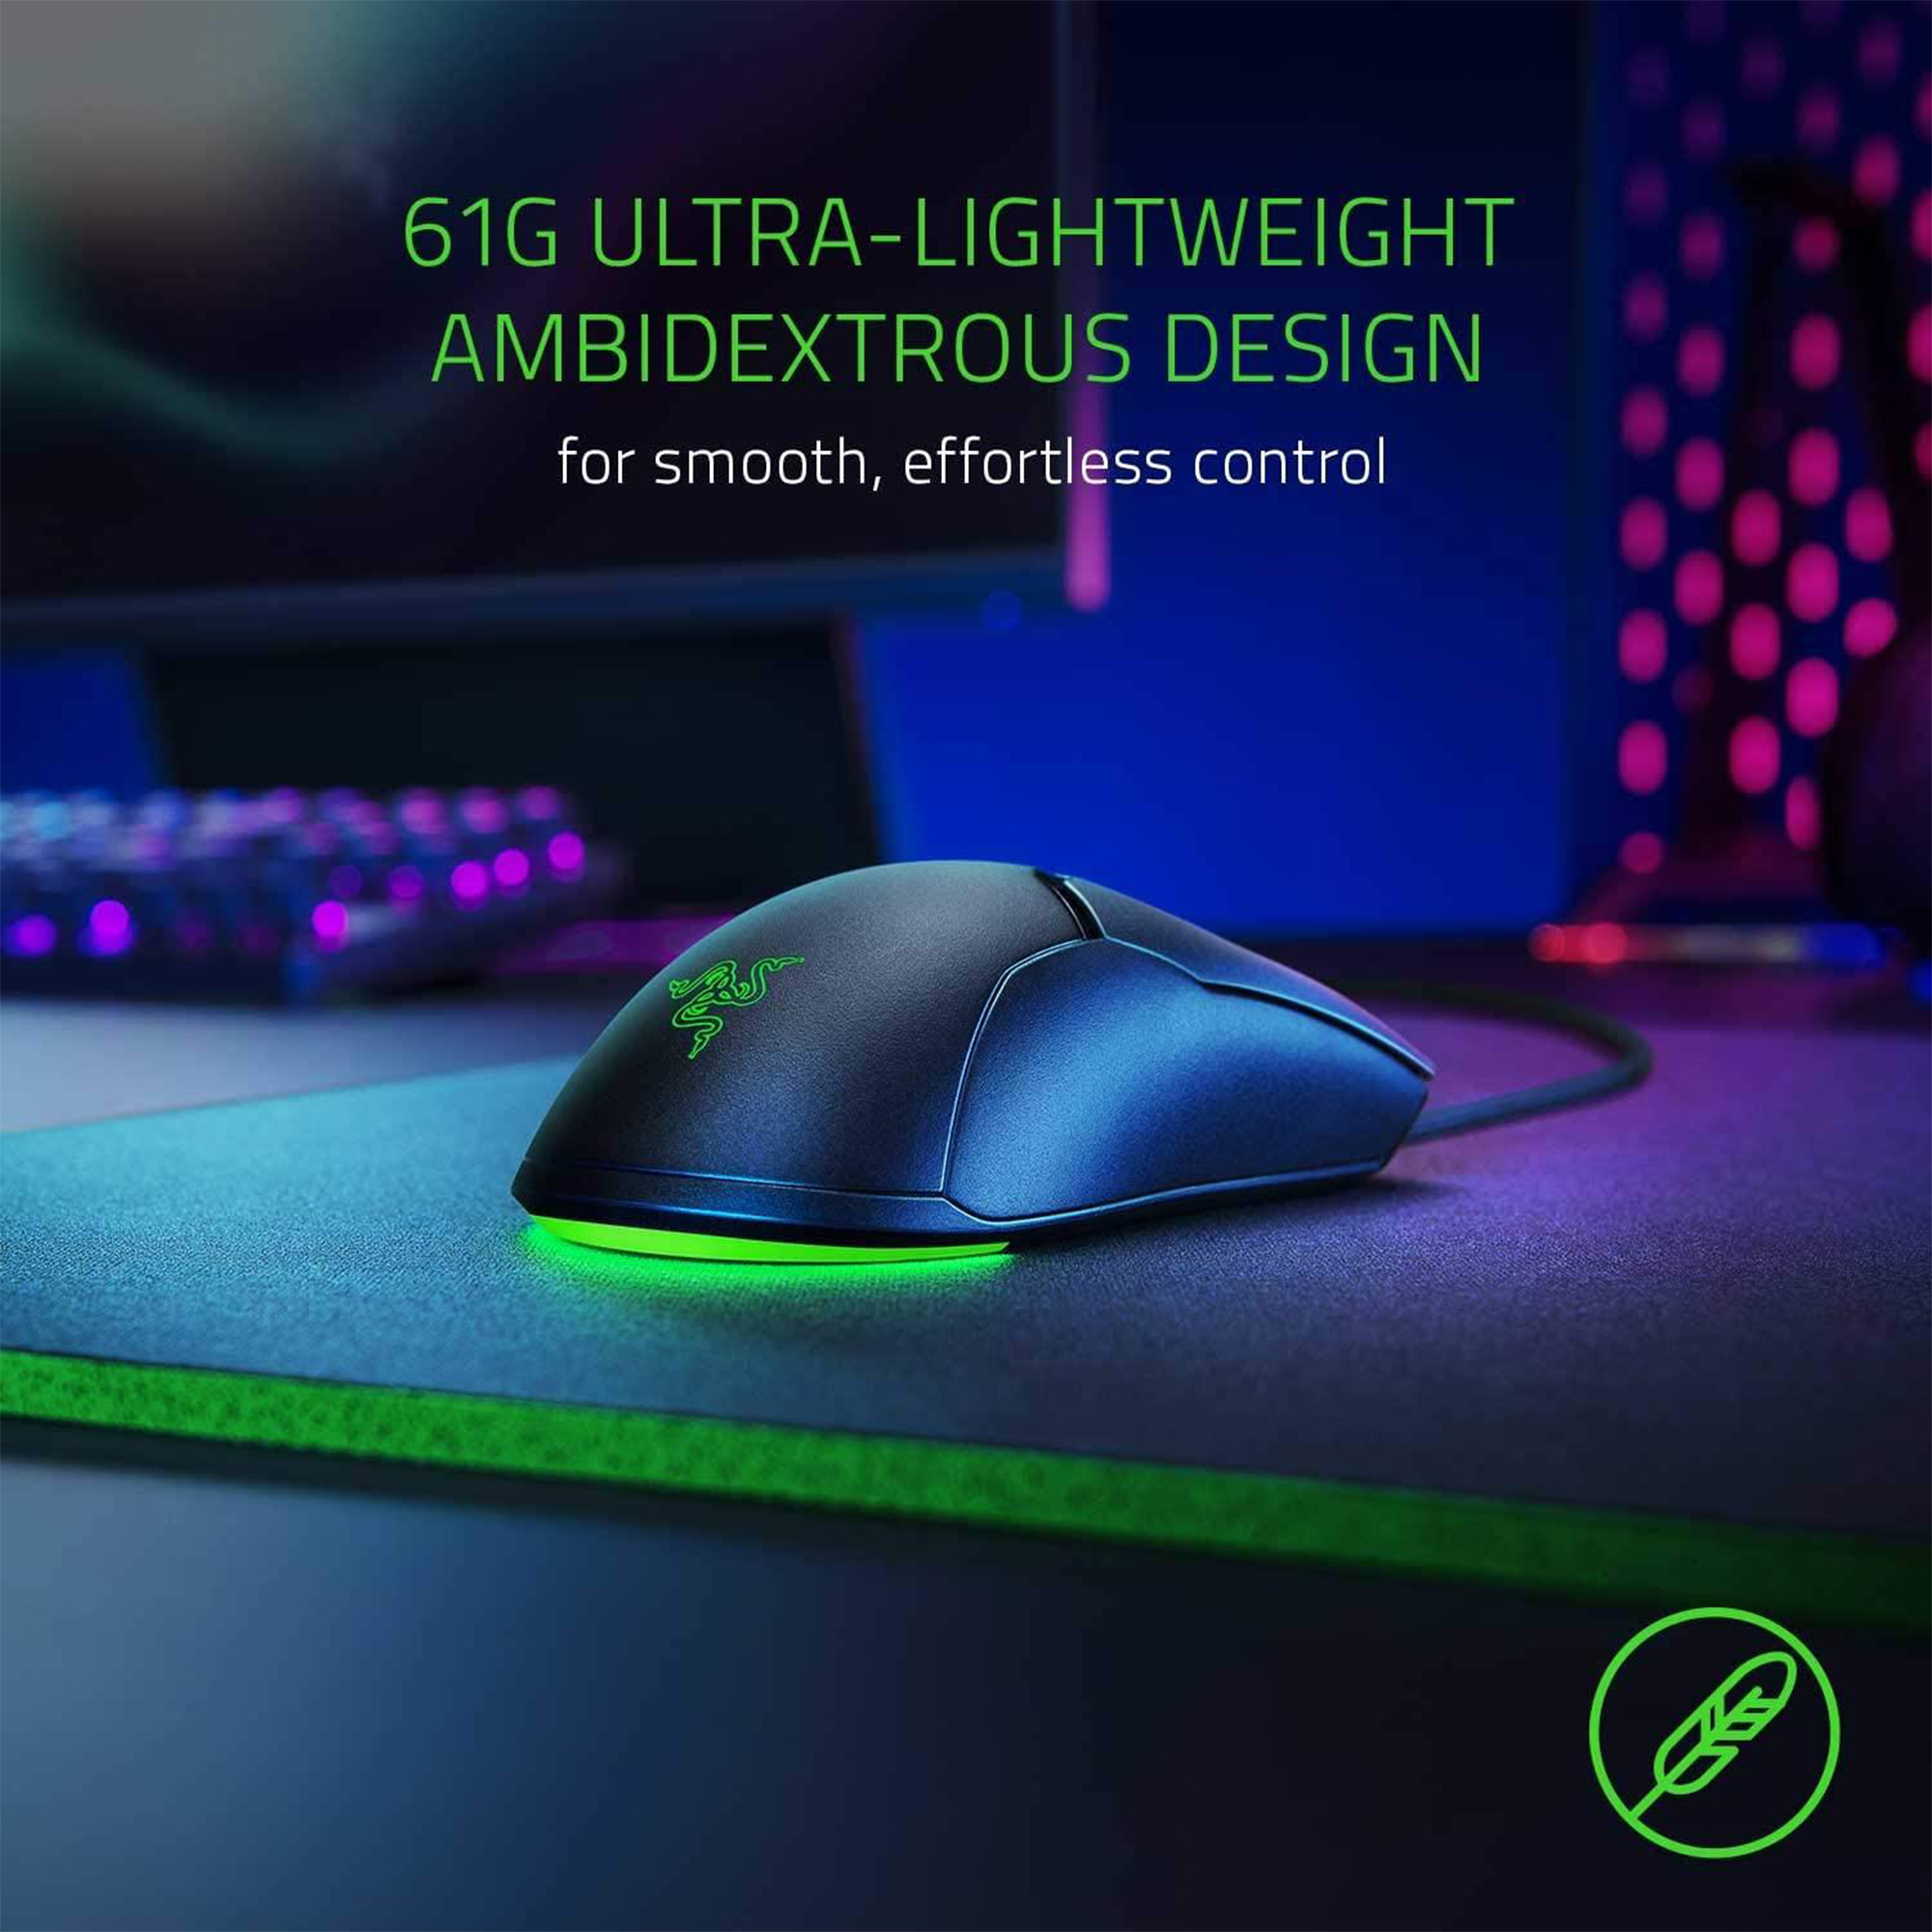 SALE] Razer Basilisk X HyperSpeed Wireless Gaming Mouse - Accenthub